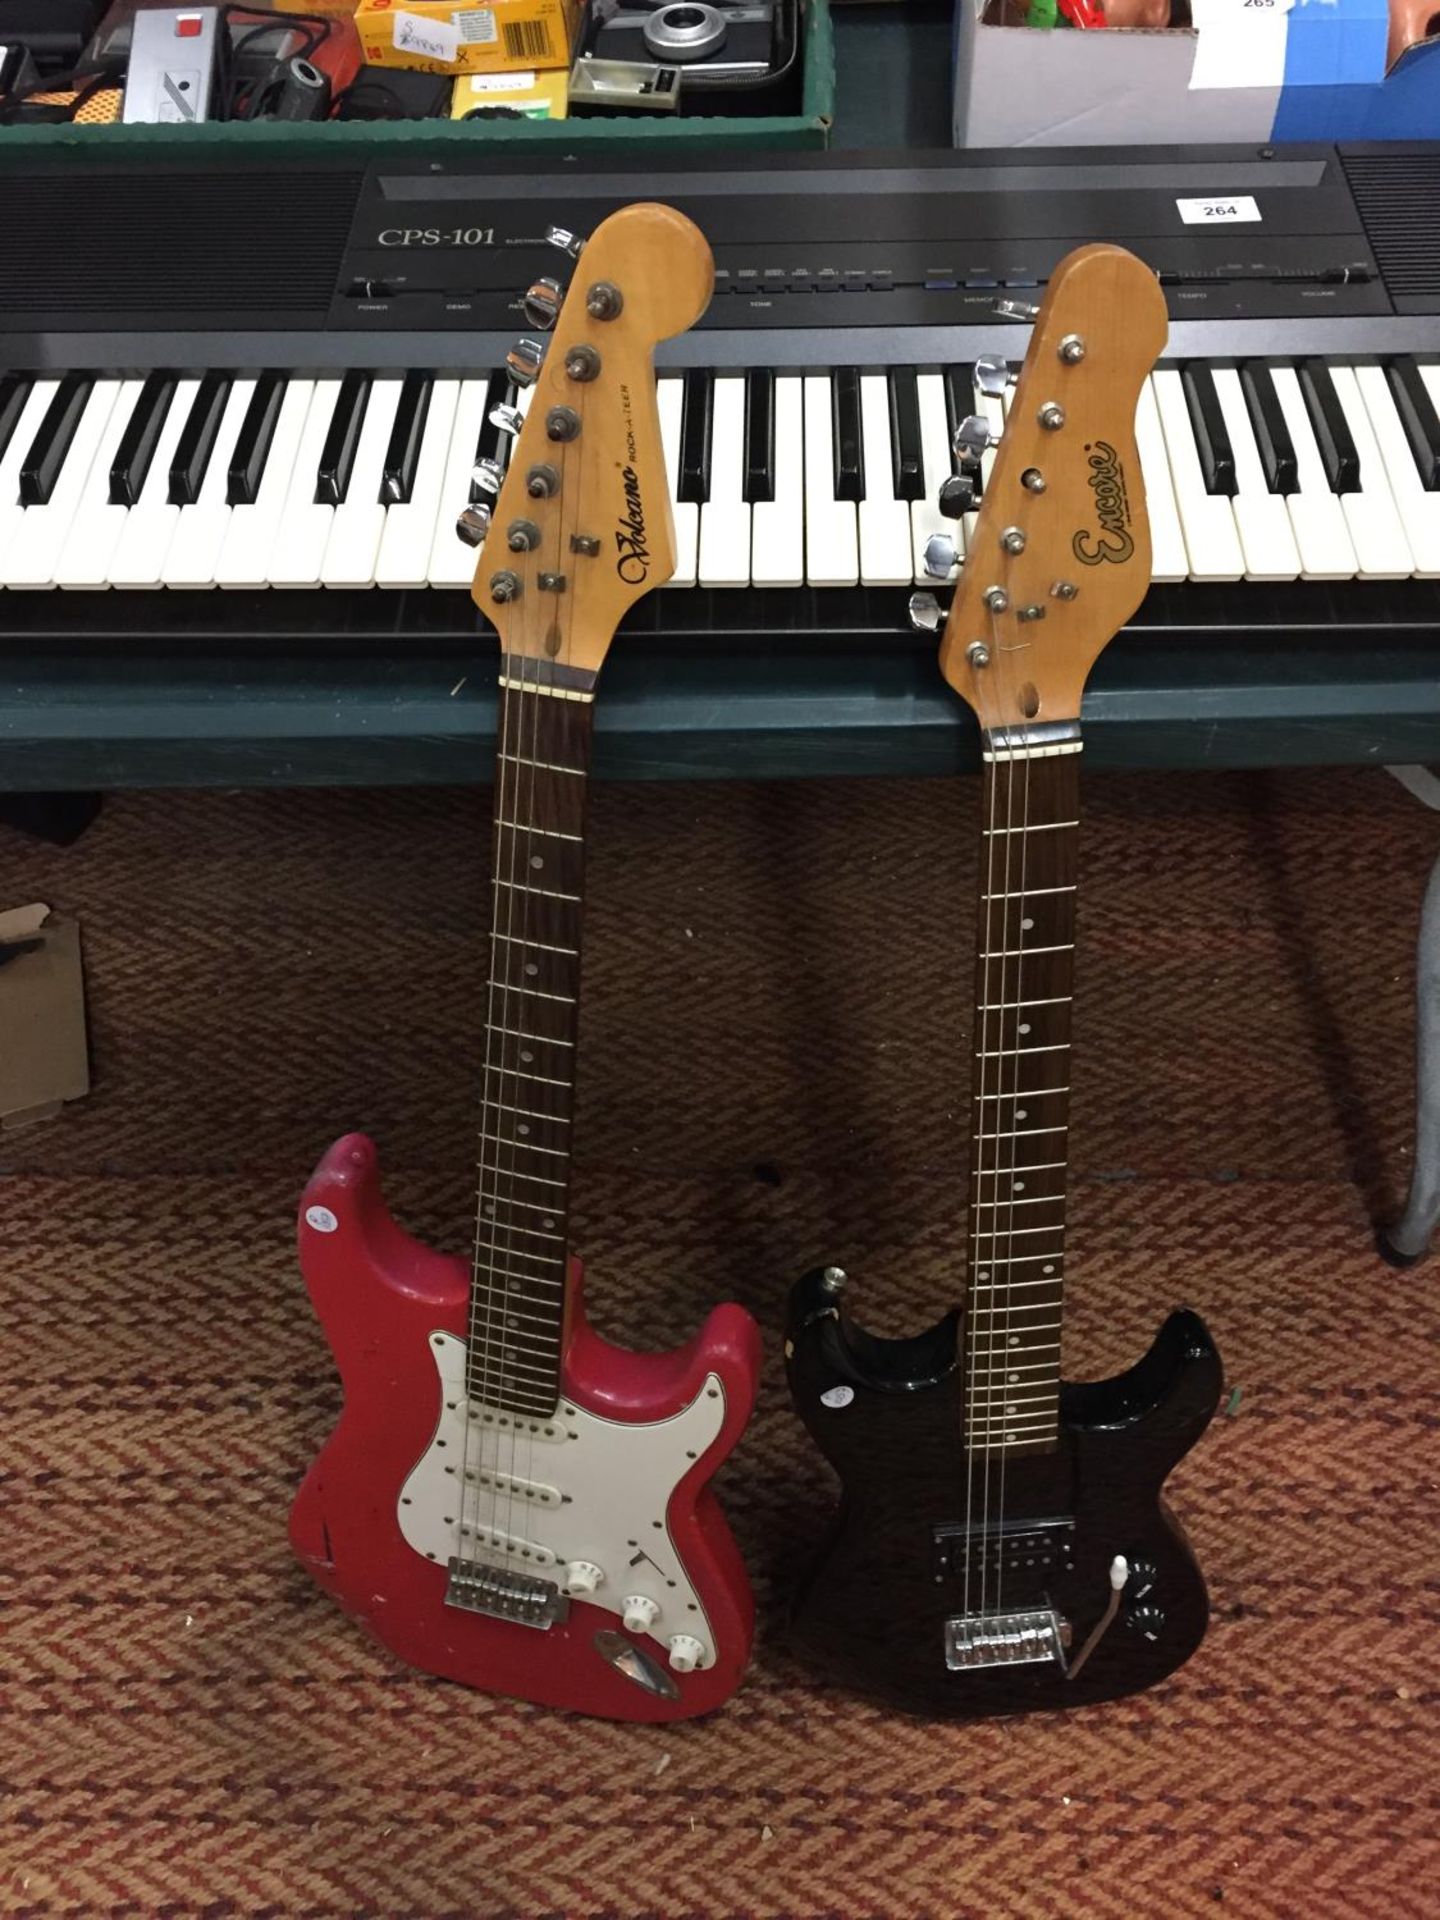 A RED VOLCANO ELECTRIC GUITAR, A BLACK ENCORE ELECTRIC GUITAR AND A CASIO KEYBOARD - Image 5 of 5